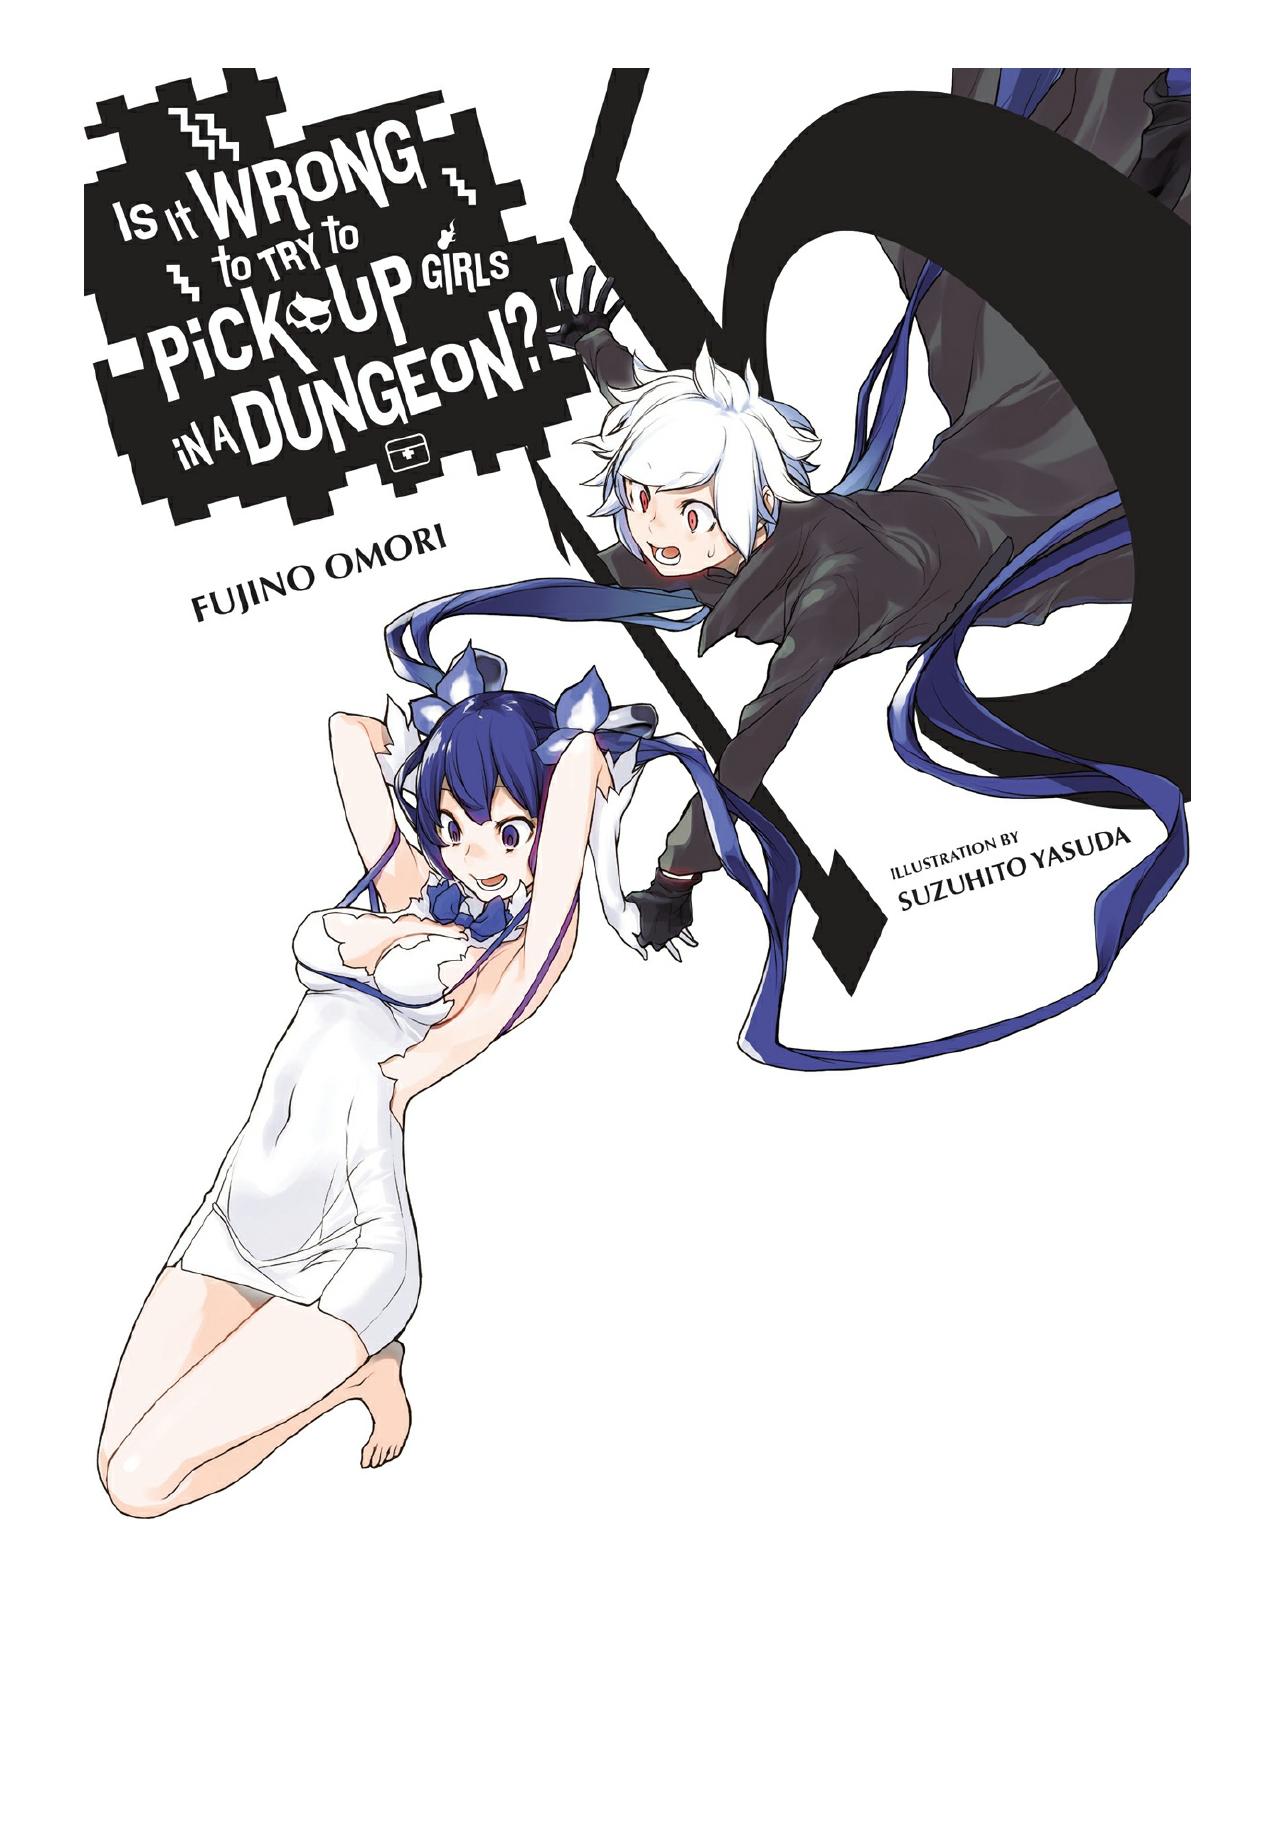 Is It Wrong to Try to Pick Up Girls in a Dungeon?, Vol. 15 by Fujino Omori & Suzuhito Yasuda